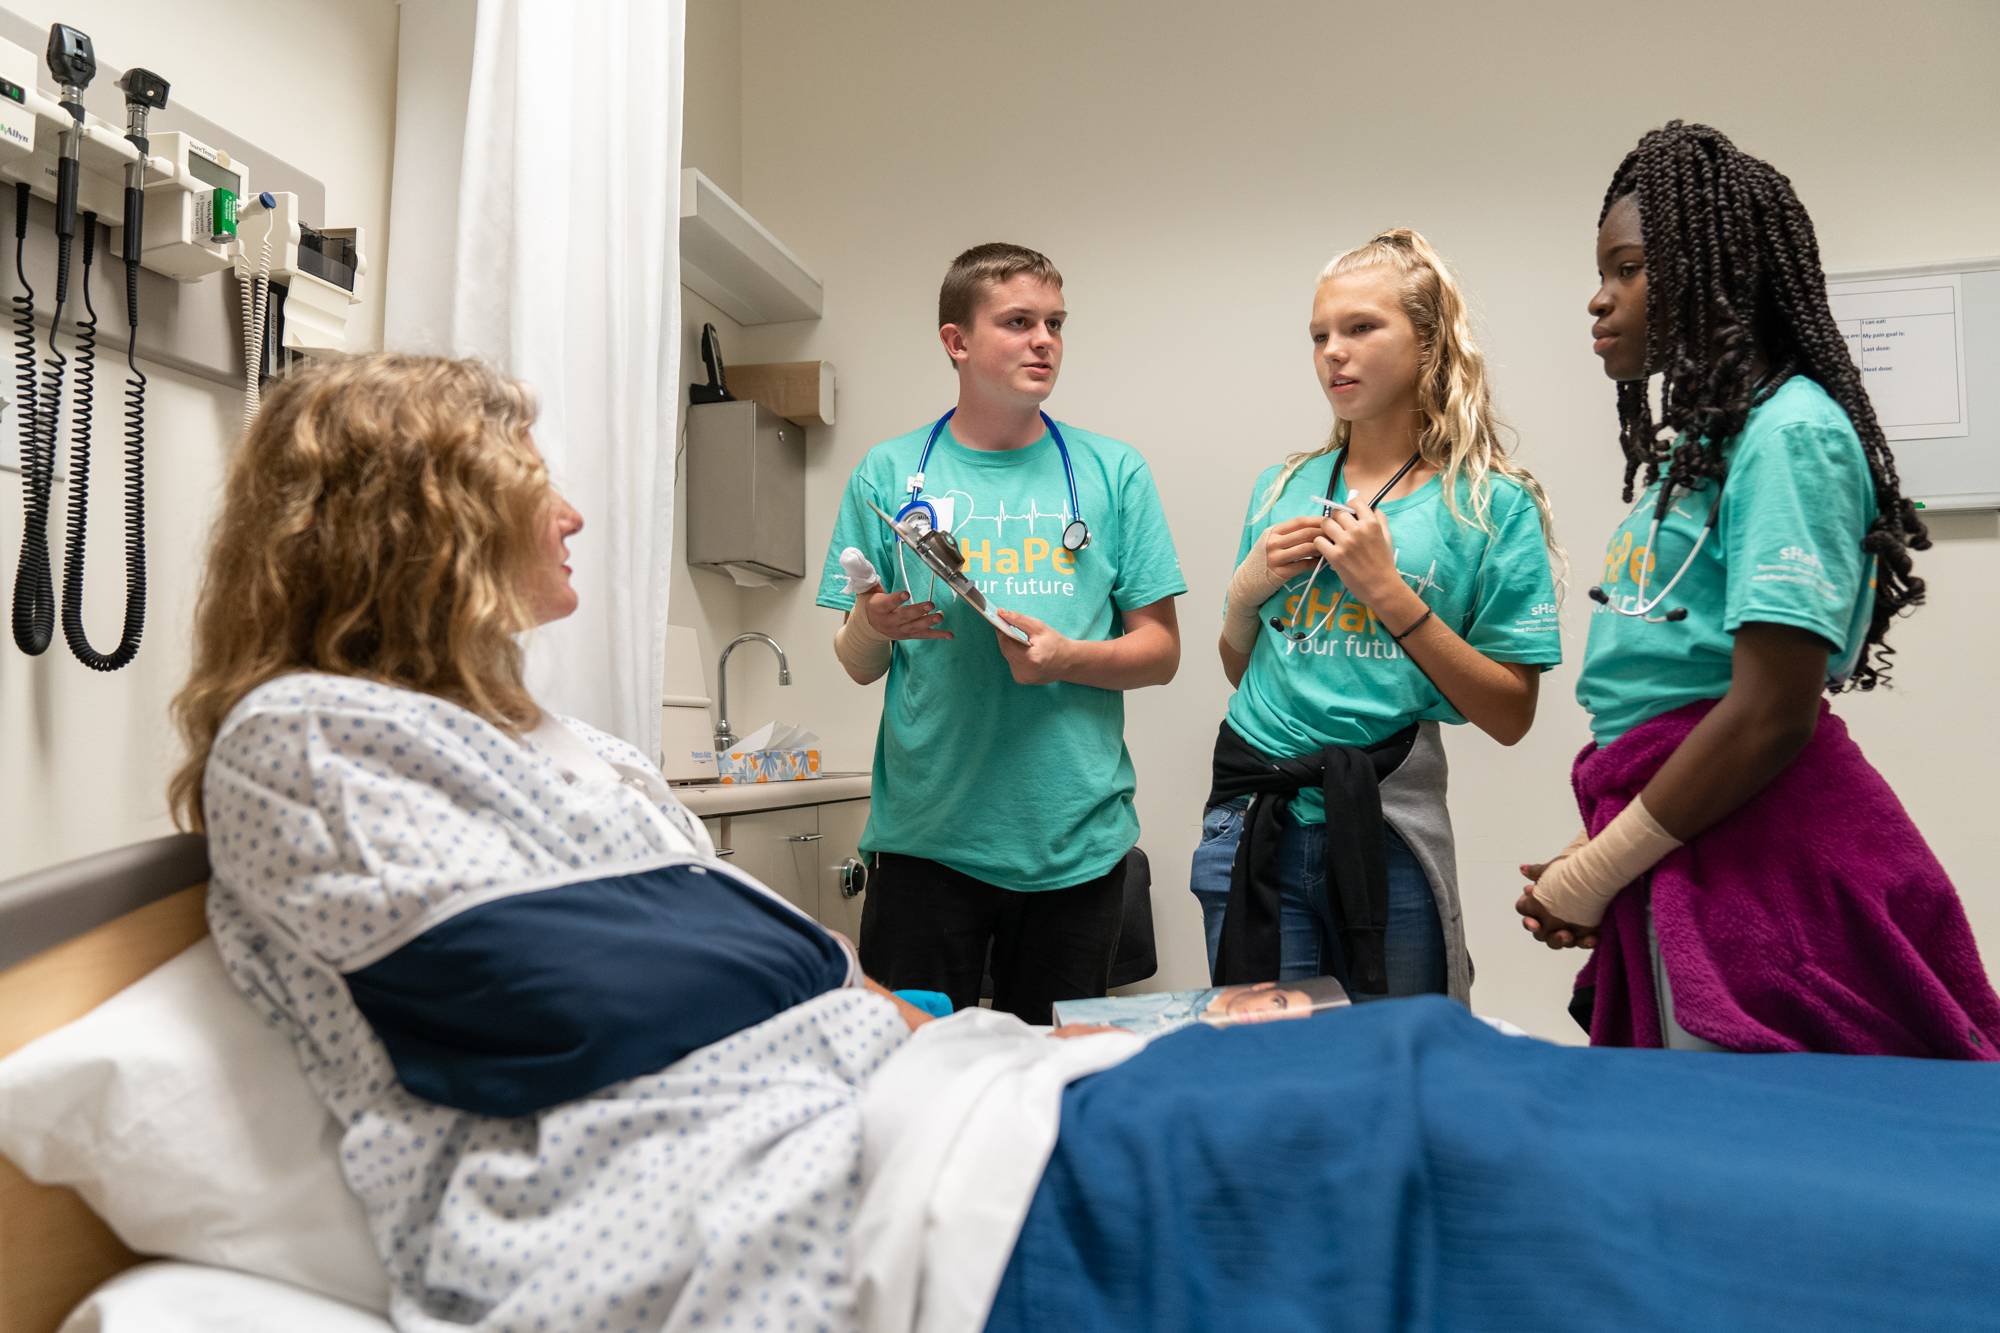 Students in simulation center with patient